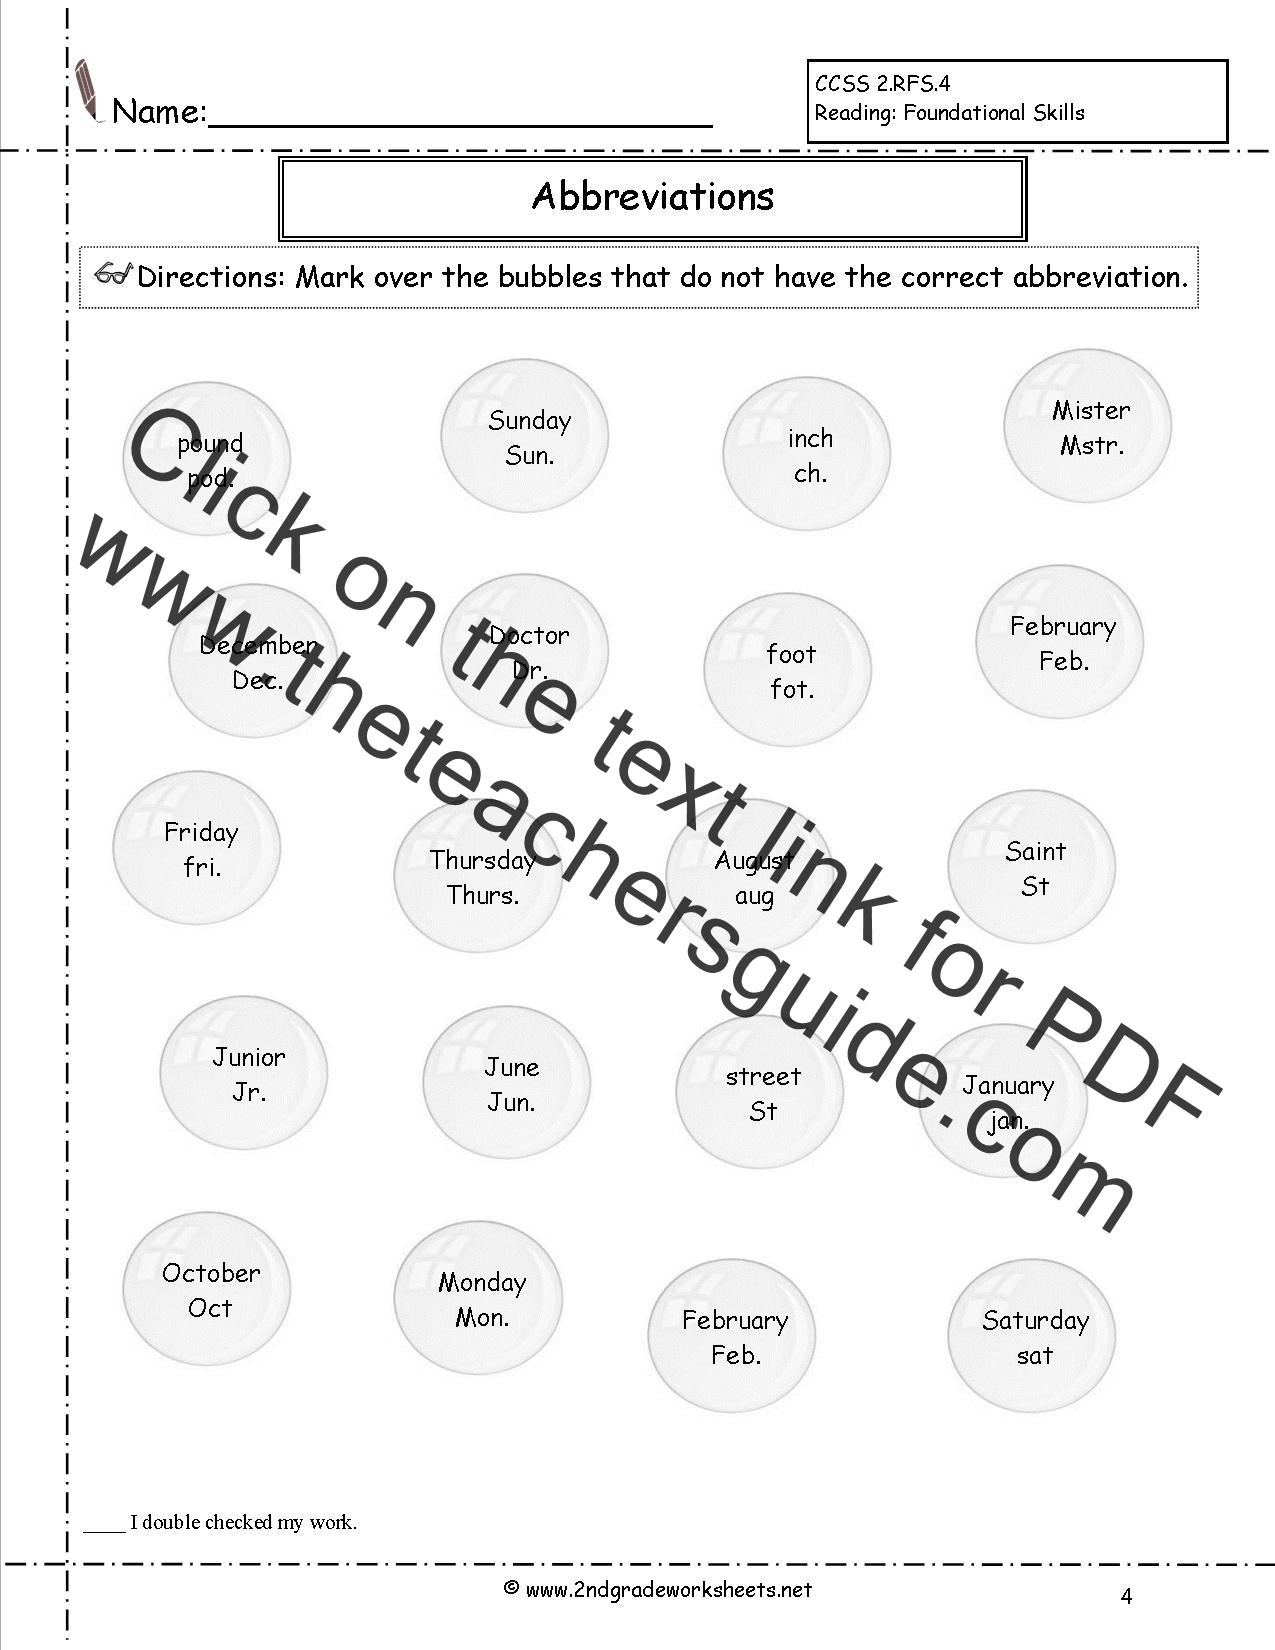 abbreviation and acronym worksheets